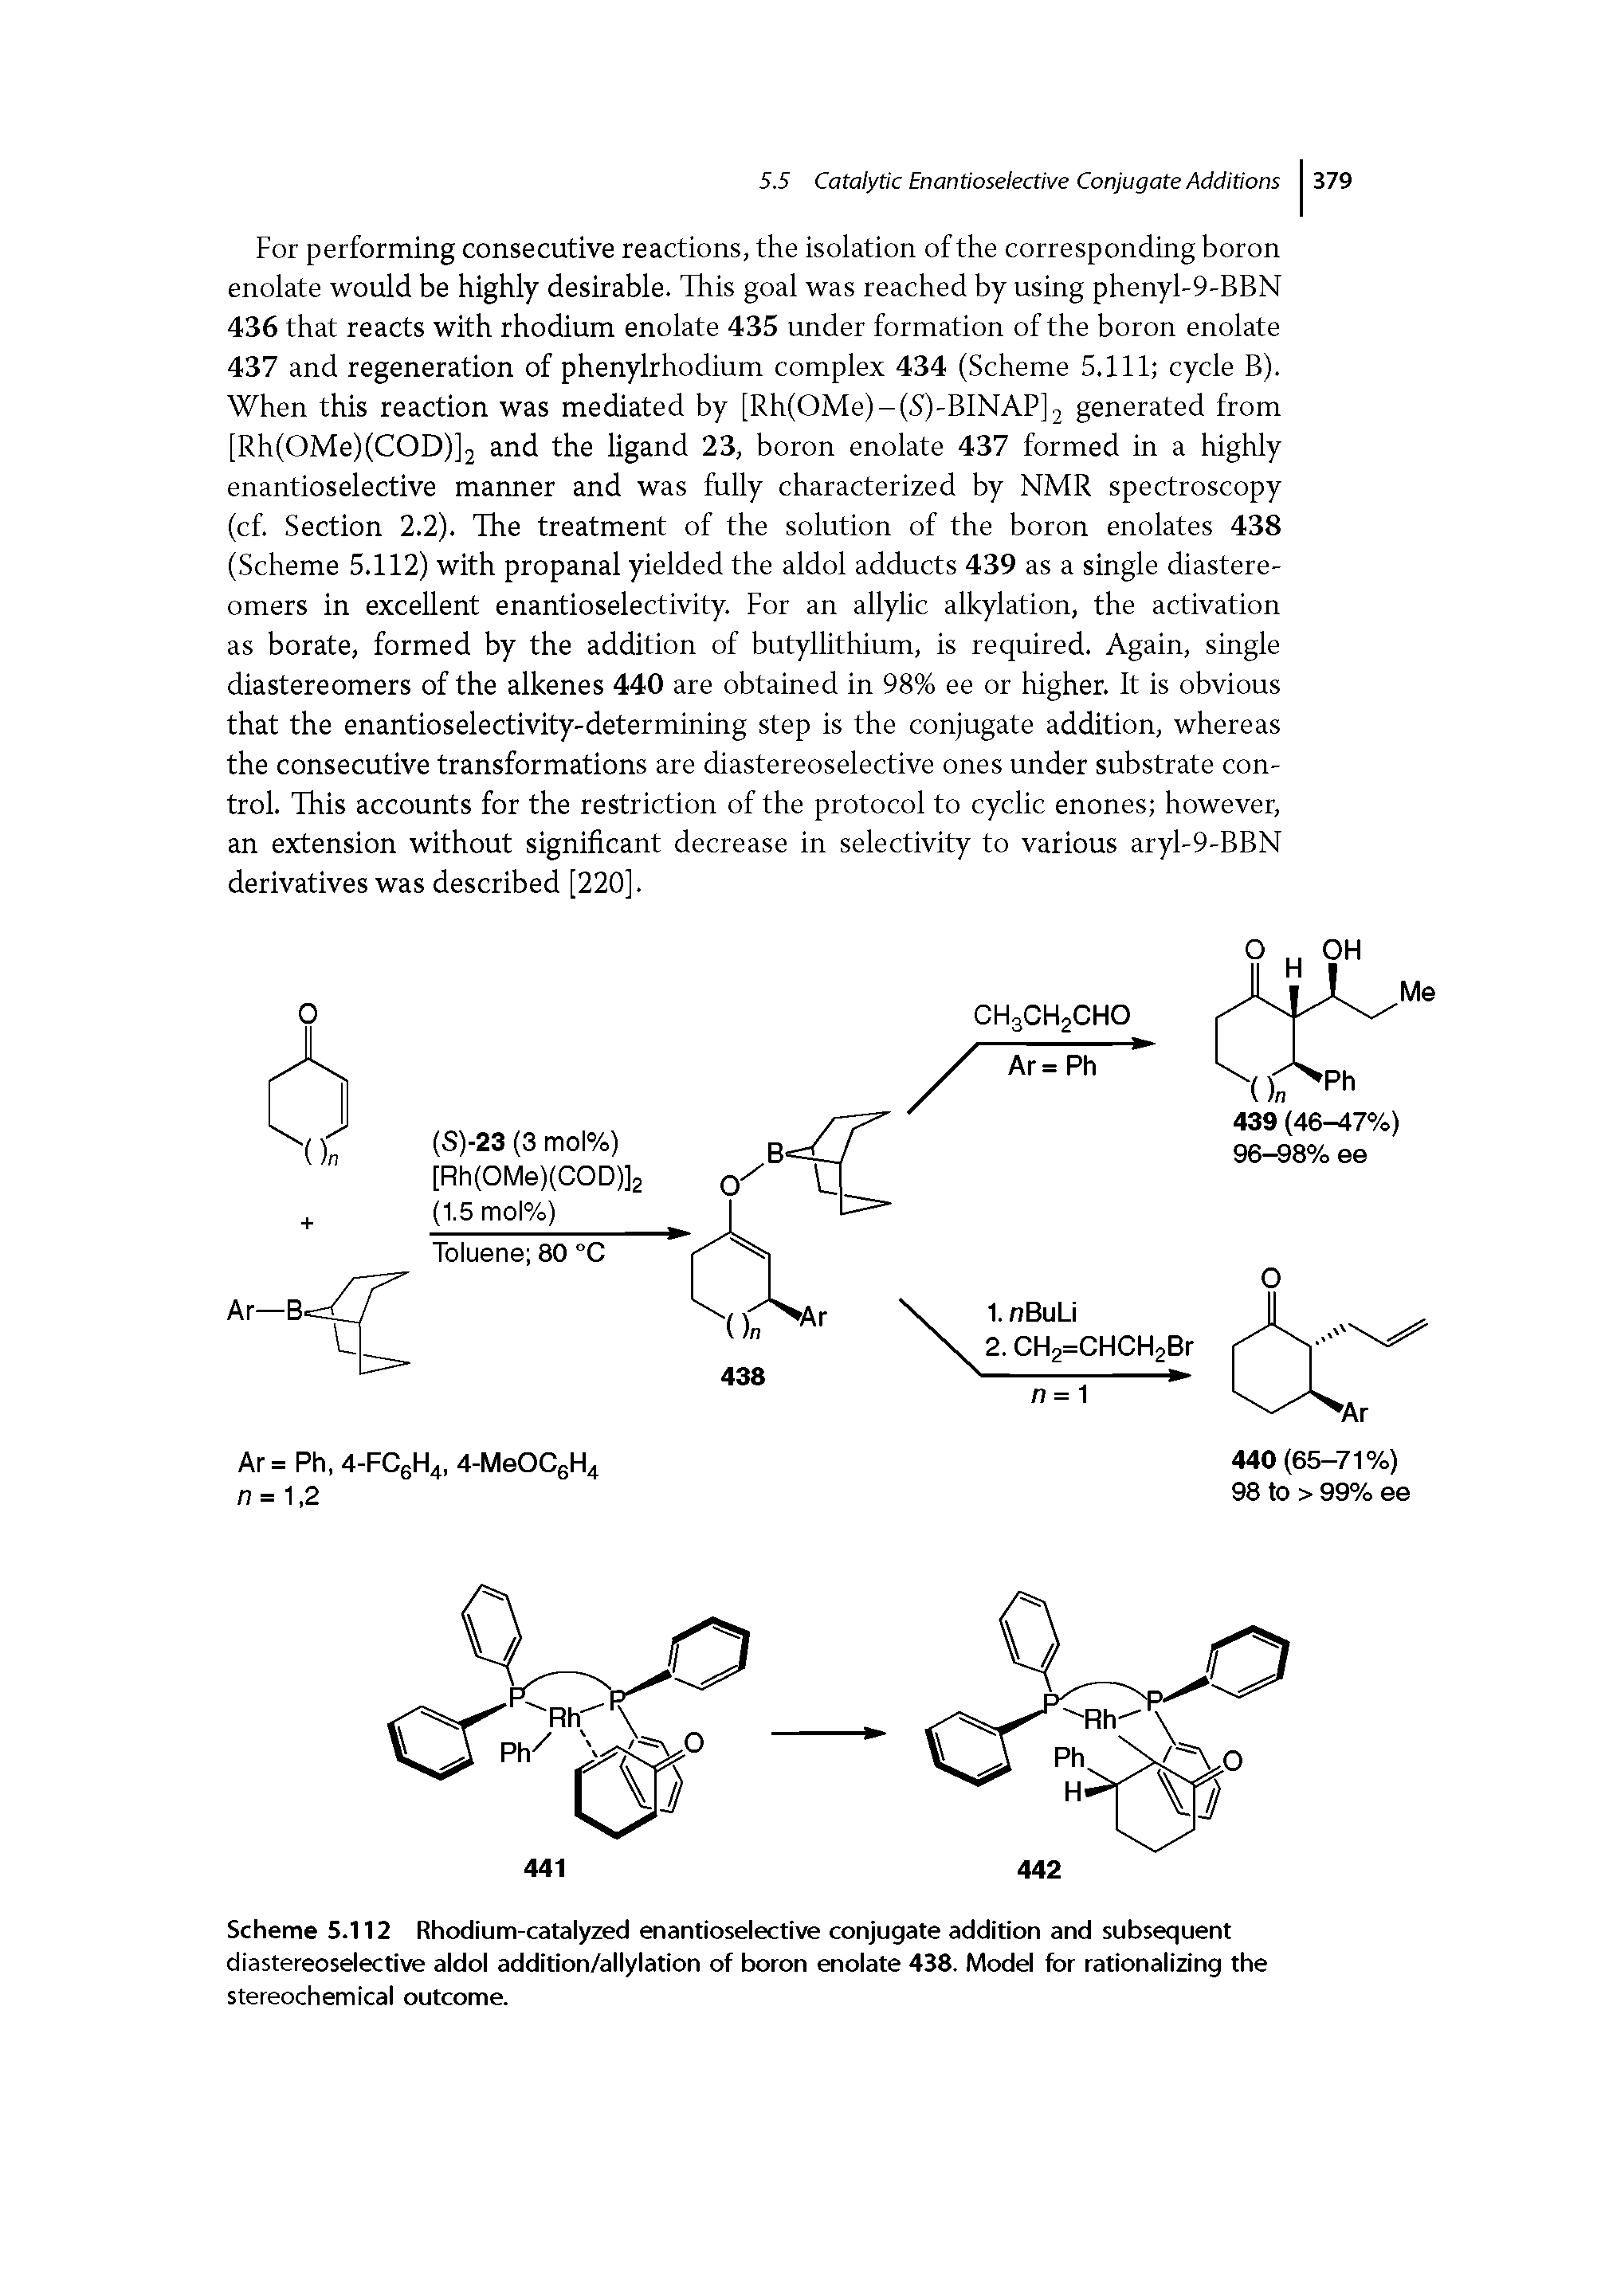 Scheme 5.112 Rhodium-catalyzed enantioselective conjugate addition and subsequent diastereoselective aldol addition/allylation of boron enolate 438. Model for rationalizing the stereochemical outcome.